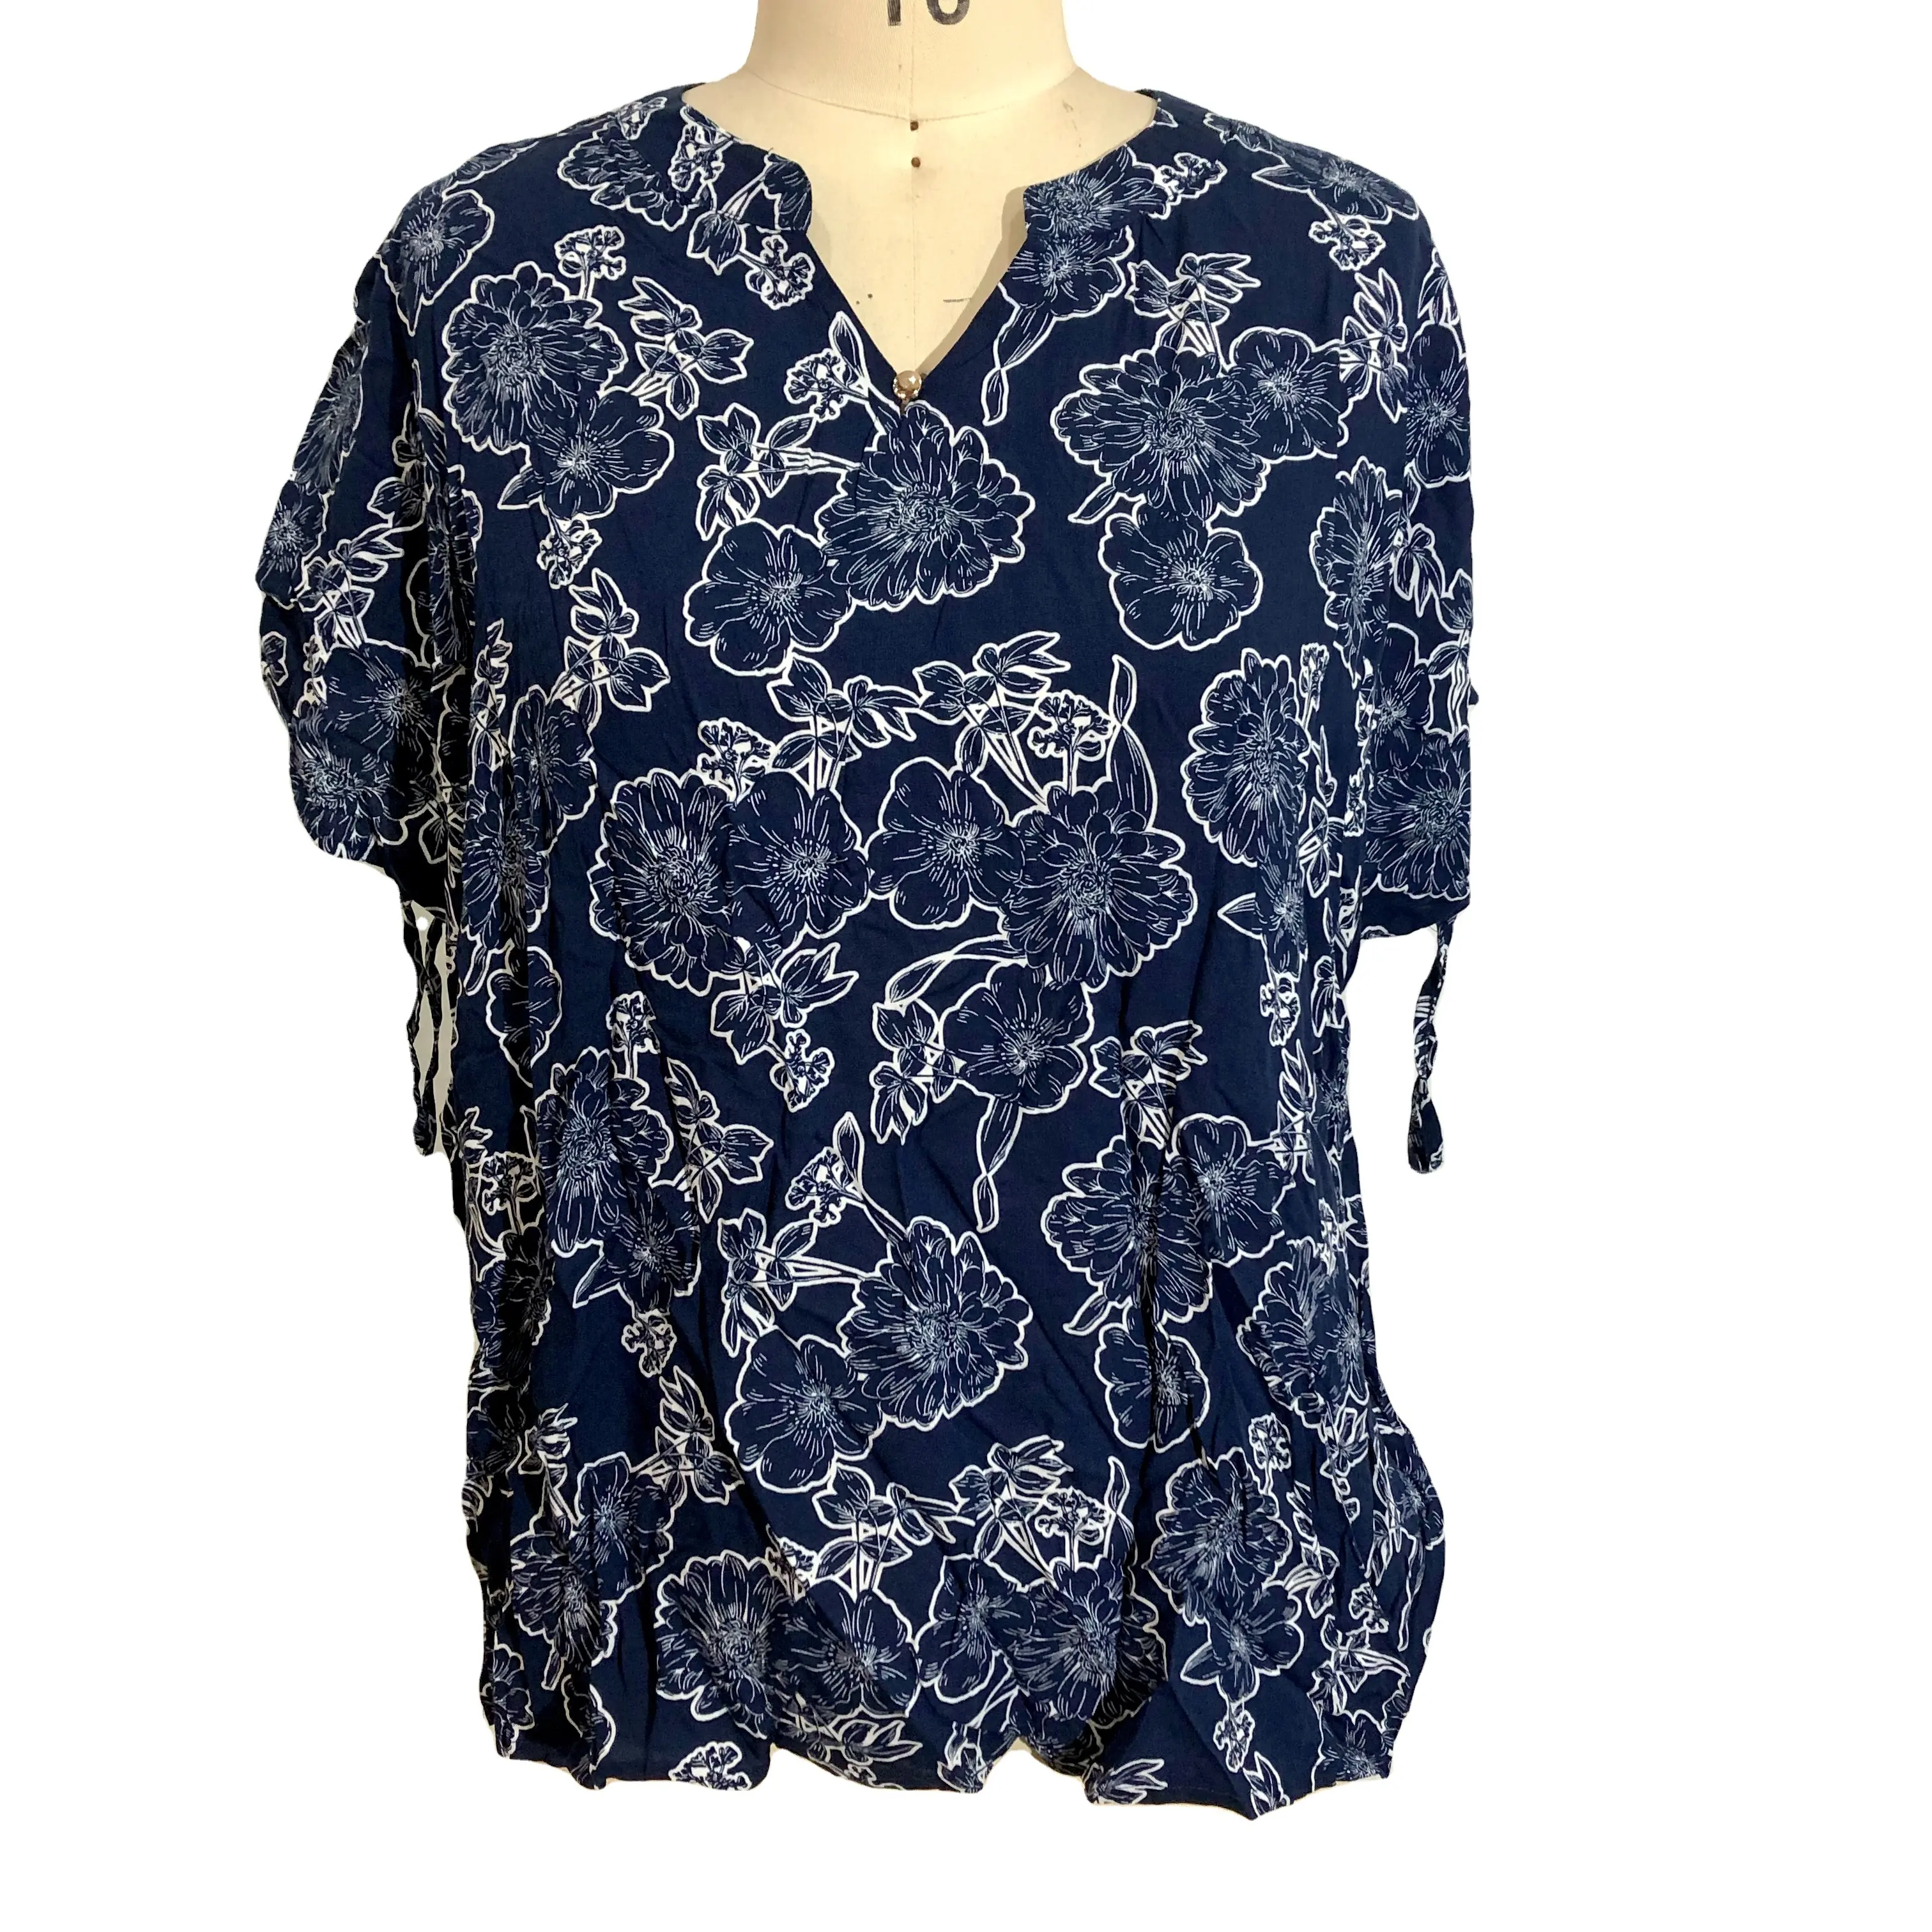 Custom Women's Floral Blouses Shirts Digital Printing V-Neck Tops With Button Elastic Cord Sleeve for Ladies Navy